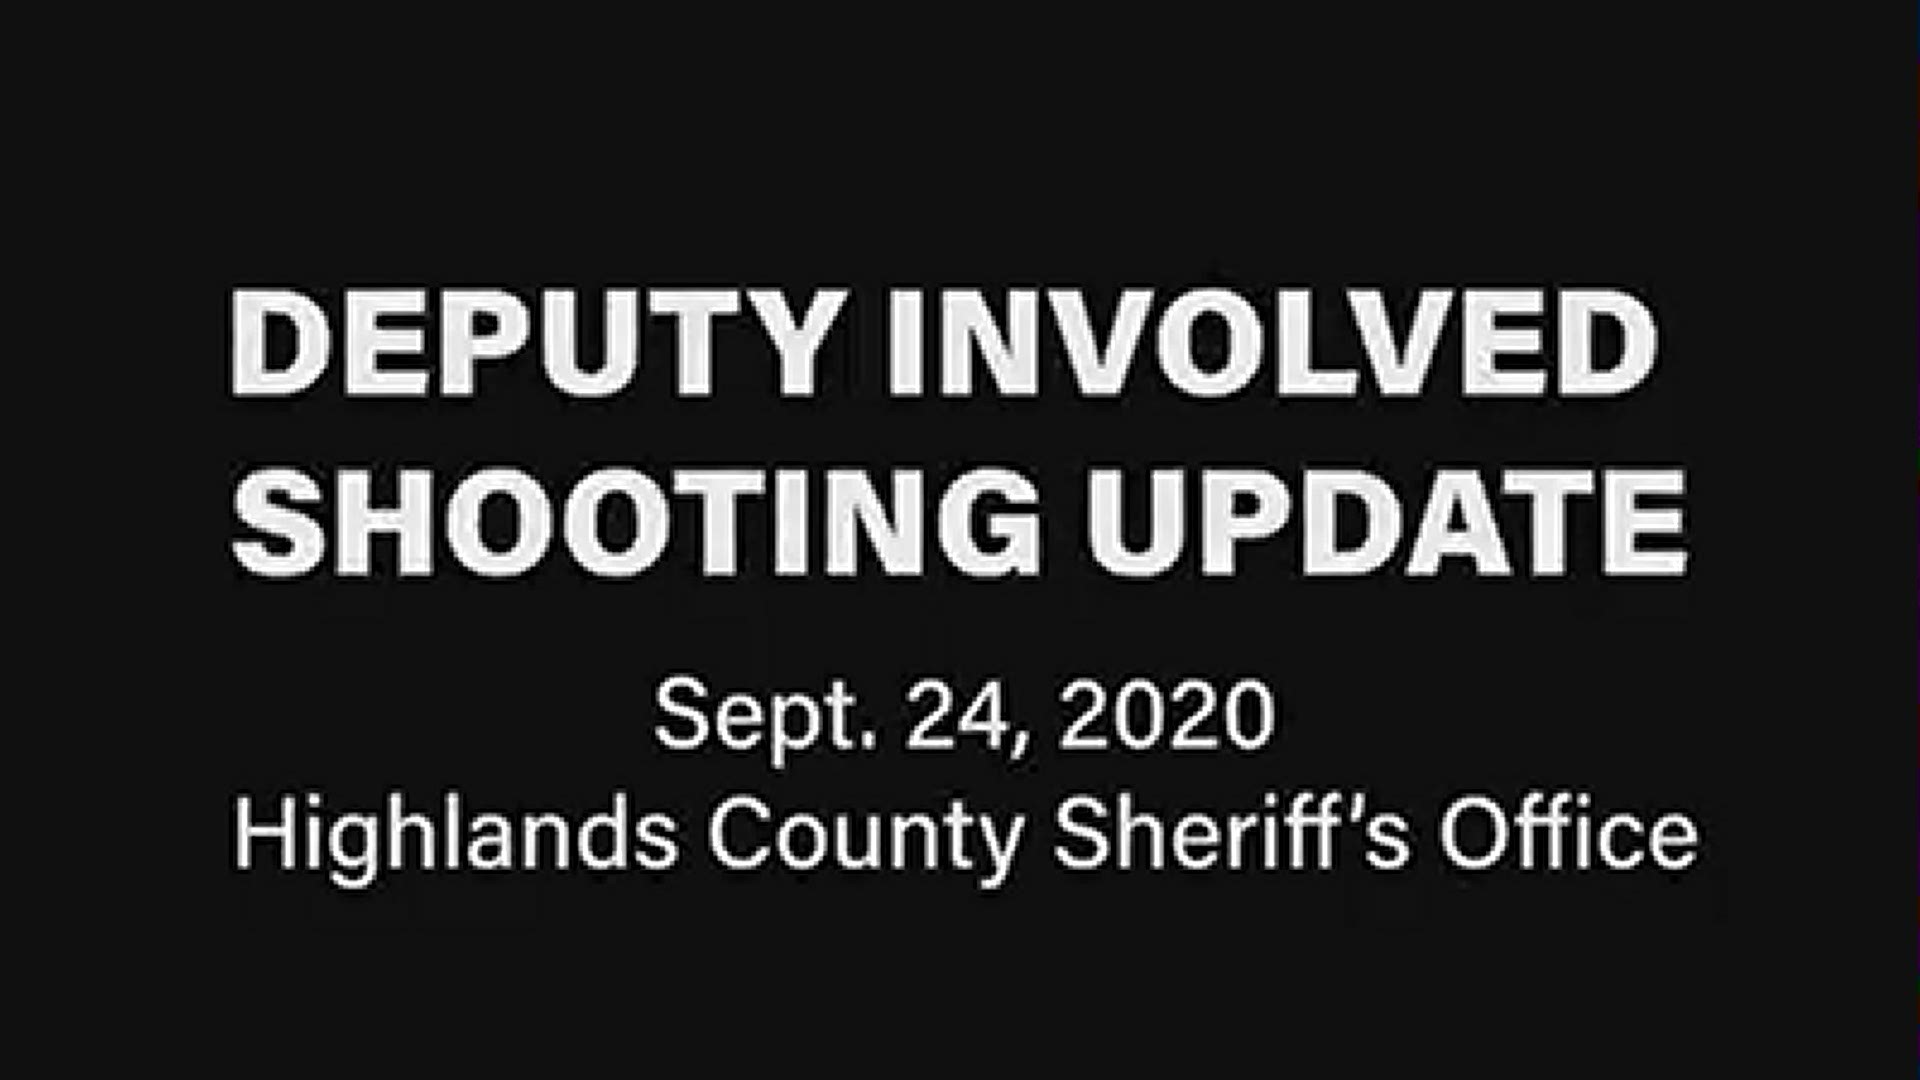 The Highlands County Sheriff's Office says its deputies shot and killed Matthew Nocerino after he shot one of its deputies in their vest.